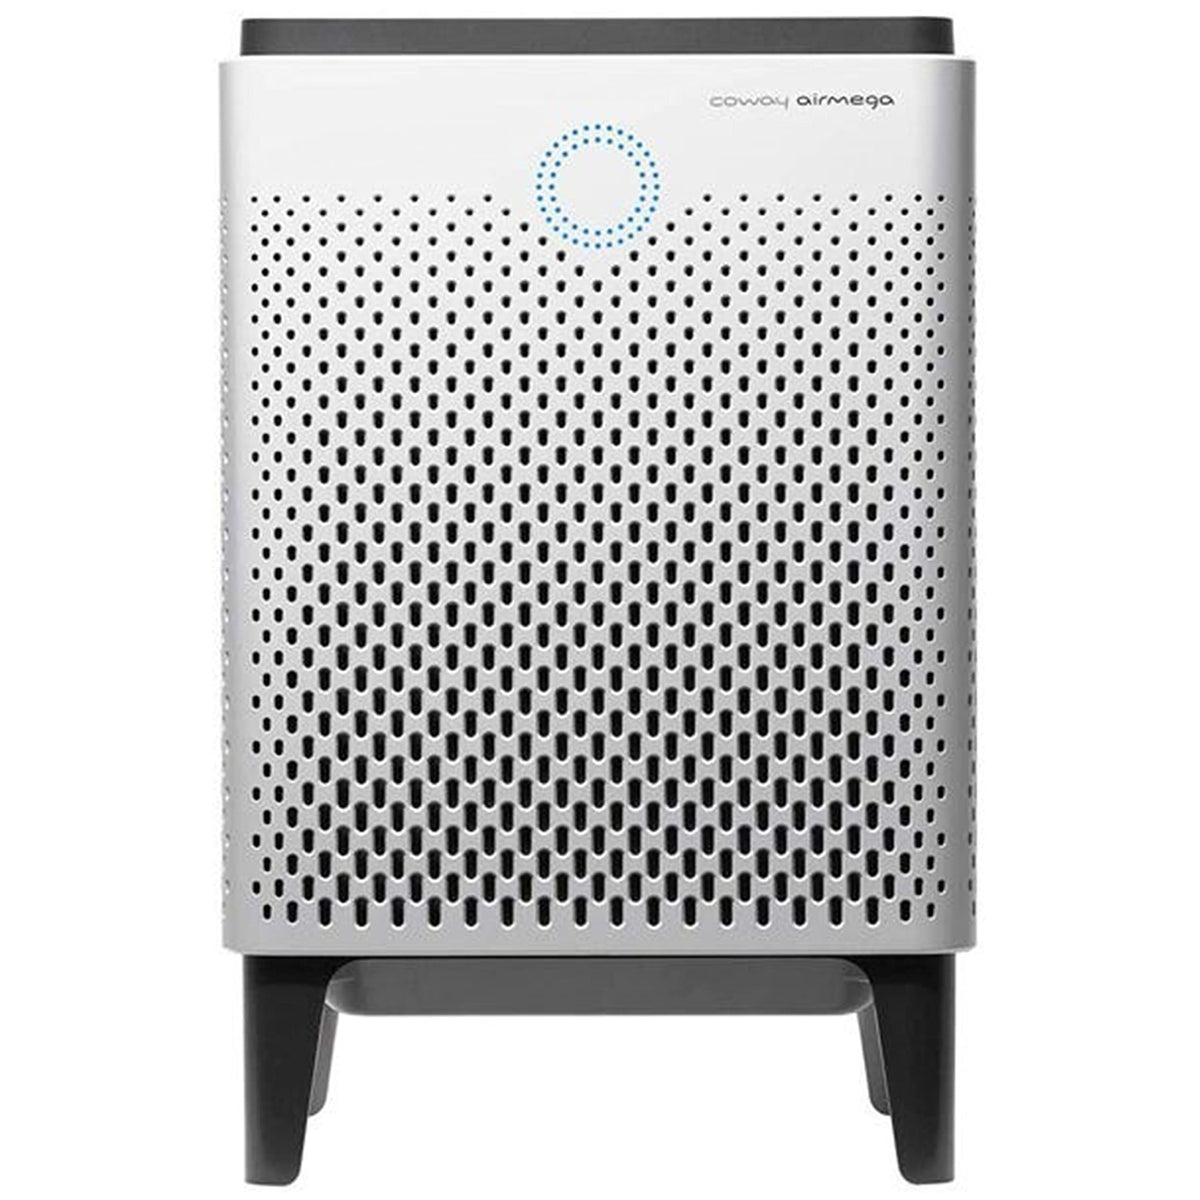 Coway Professional Air Purifier for Home, Longest Filter Life 8500 Hrs, Green True HEPA Filter, Traps 99.99% Virus & PM 0.1 Particles, Warranty 7 Years (AirMega 300S (AP-1515G))